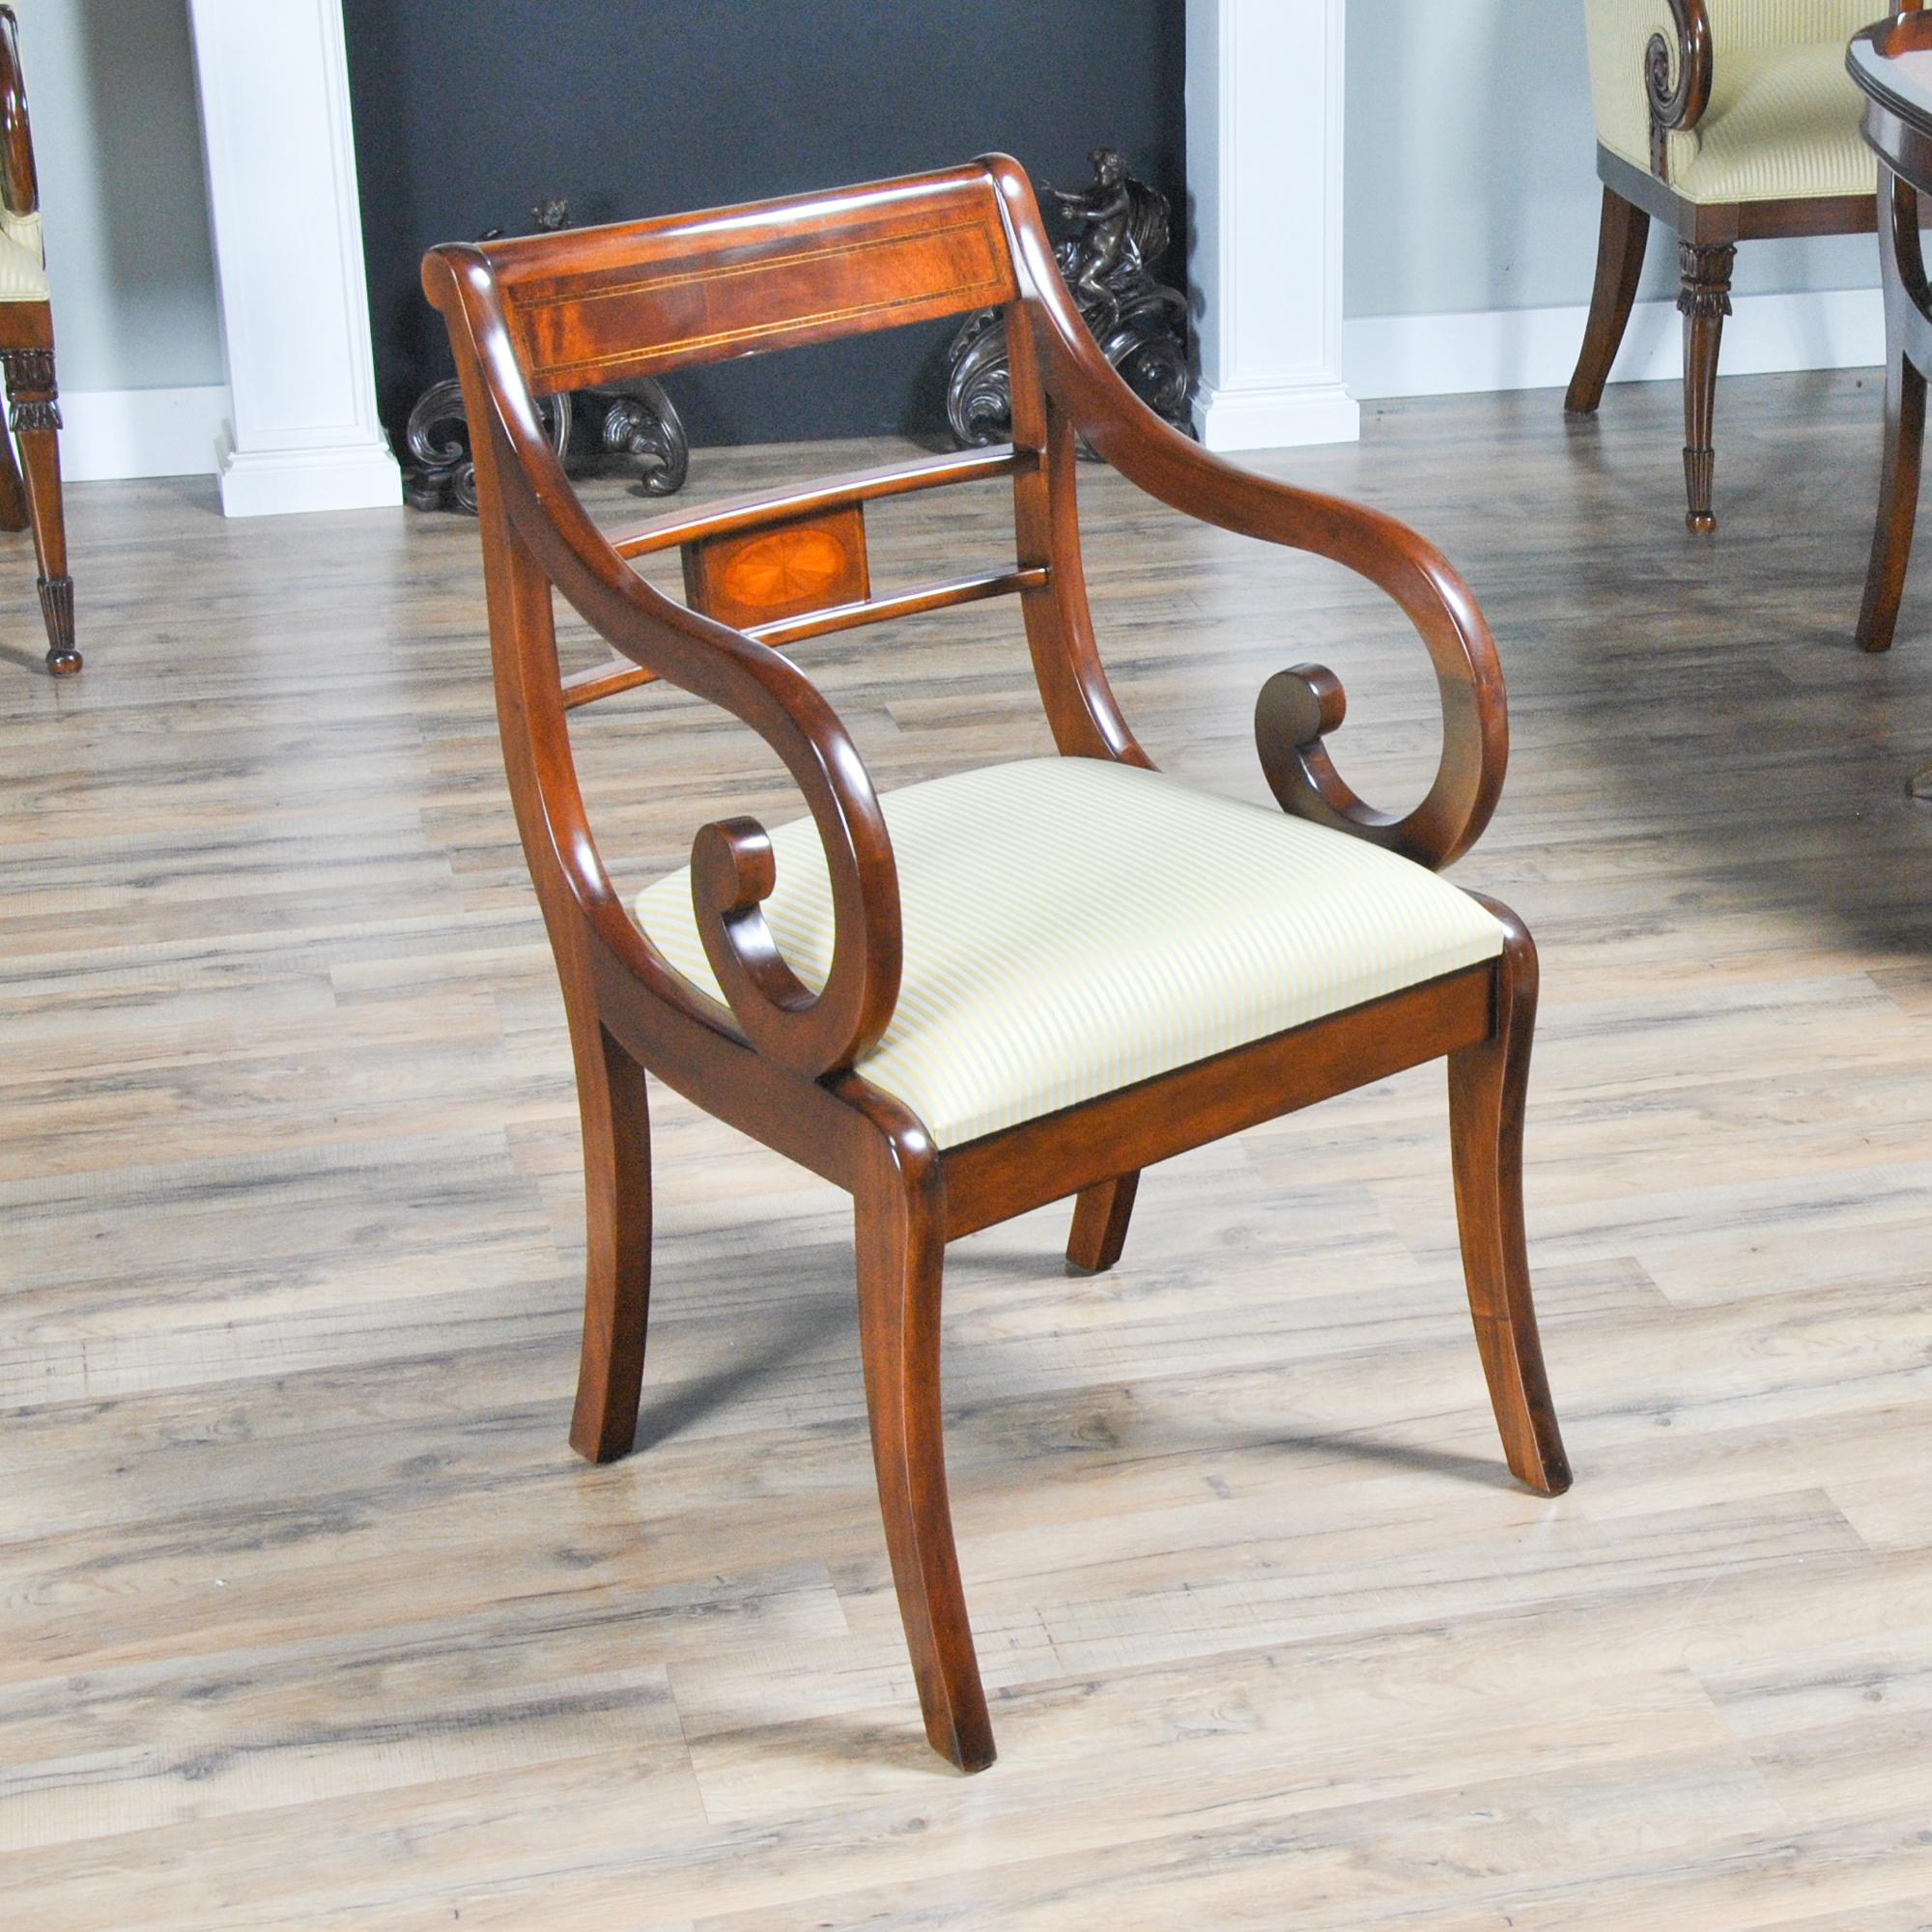 This Set of 10 Banded Mahogany Chairs consists of 2 arm chairs and 8 side chairs. The chairs are created from the finest grade of plantation grown solid mahogany and the finest available veneers. All of these materials come together to create a